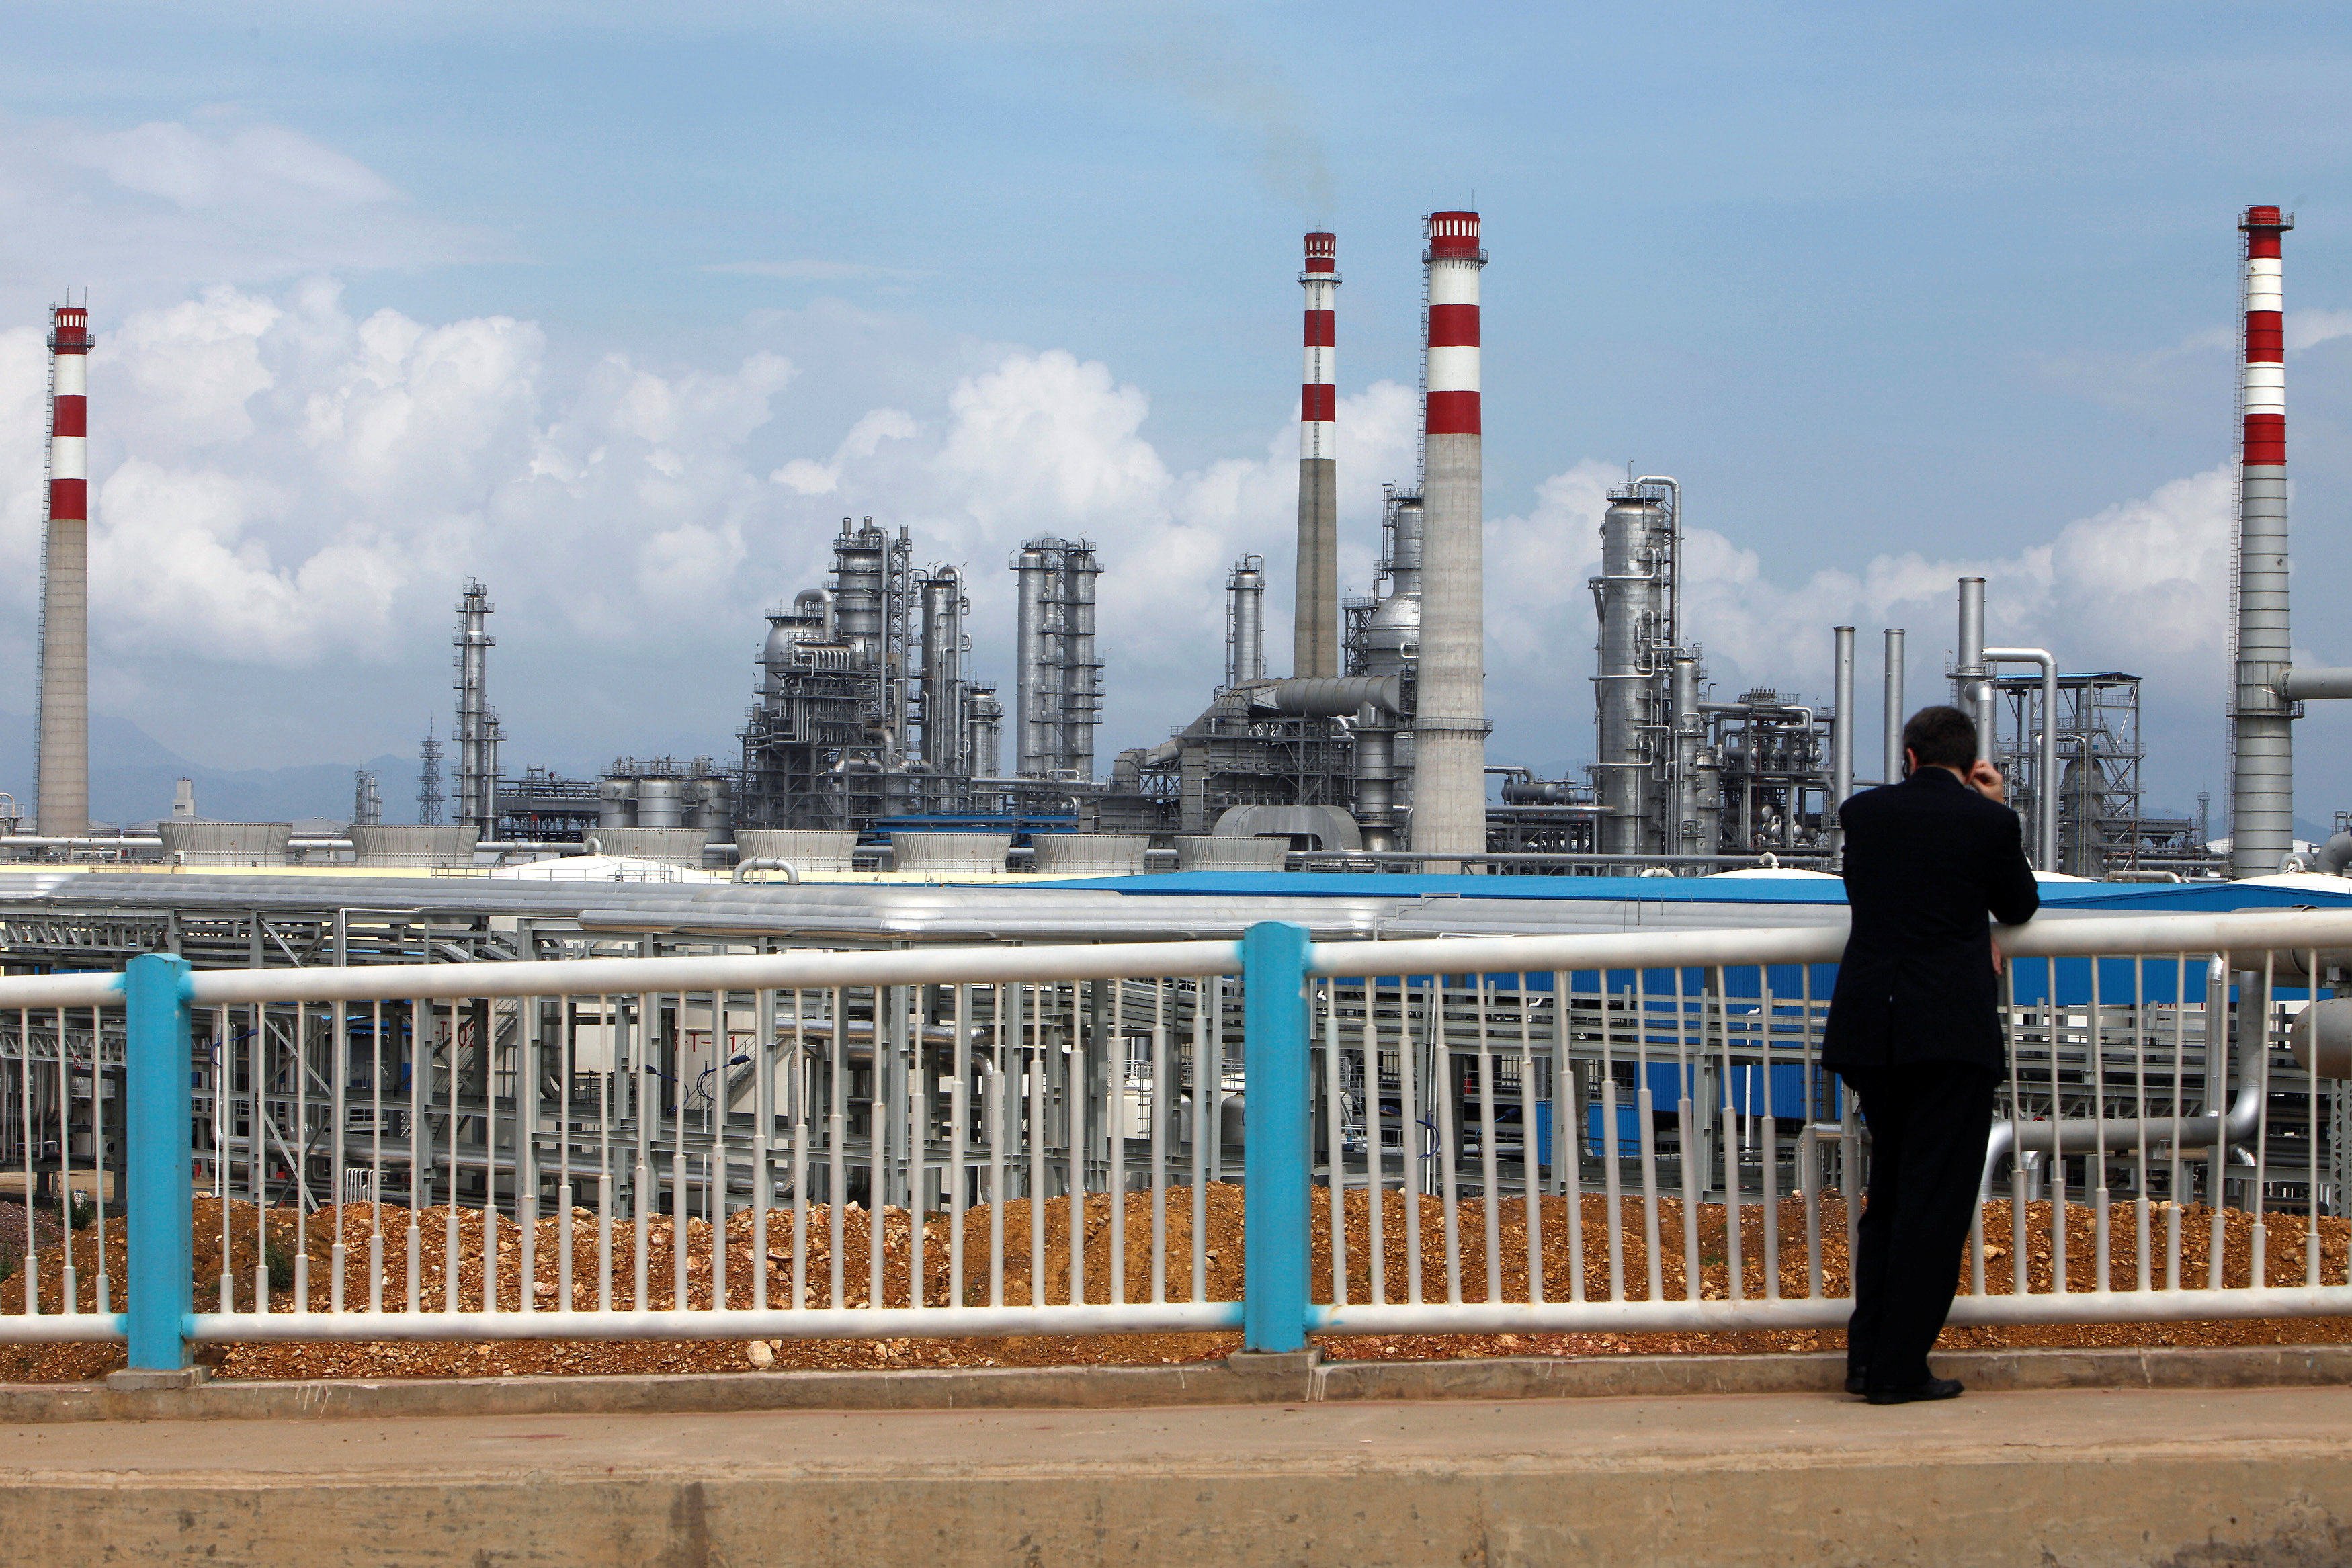 China National Offshore Oil Corporation’s oil refinery in Huizhou in southern China’s Guangdong province on July 28, 2009. Photo: Reuters